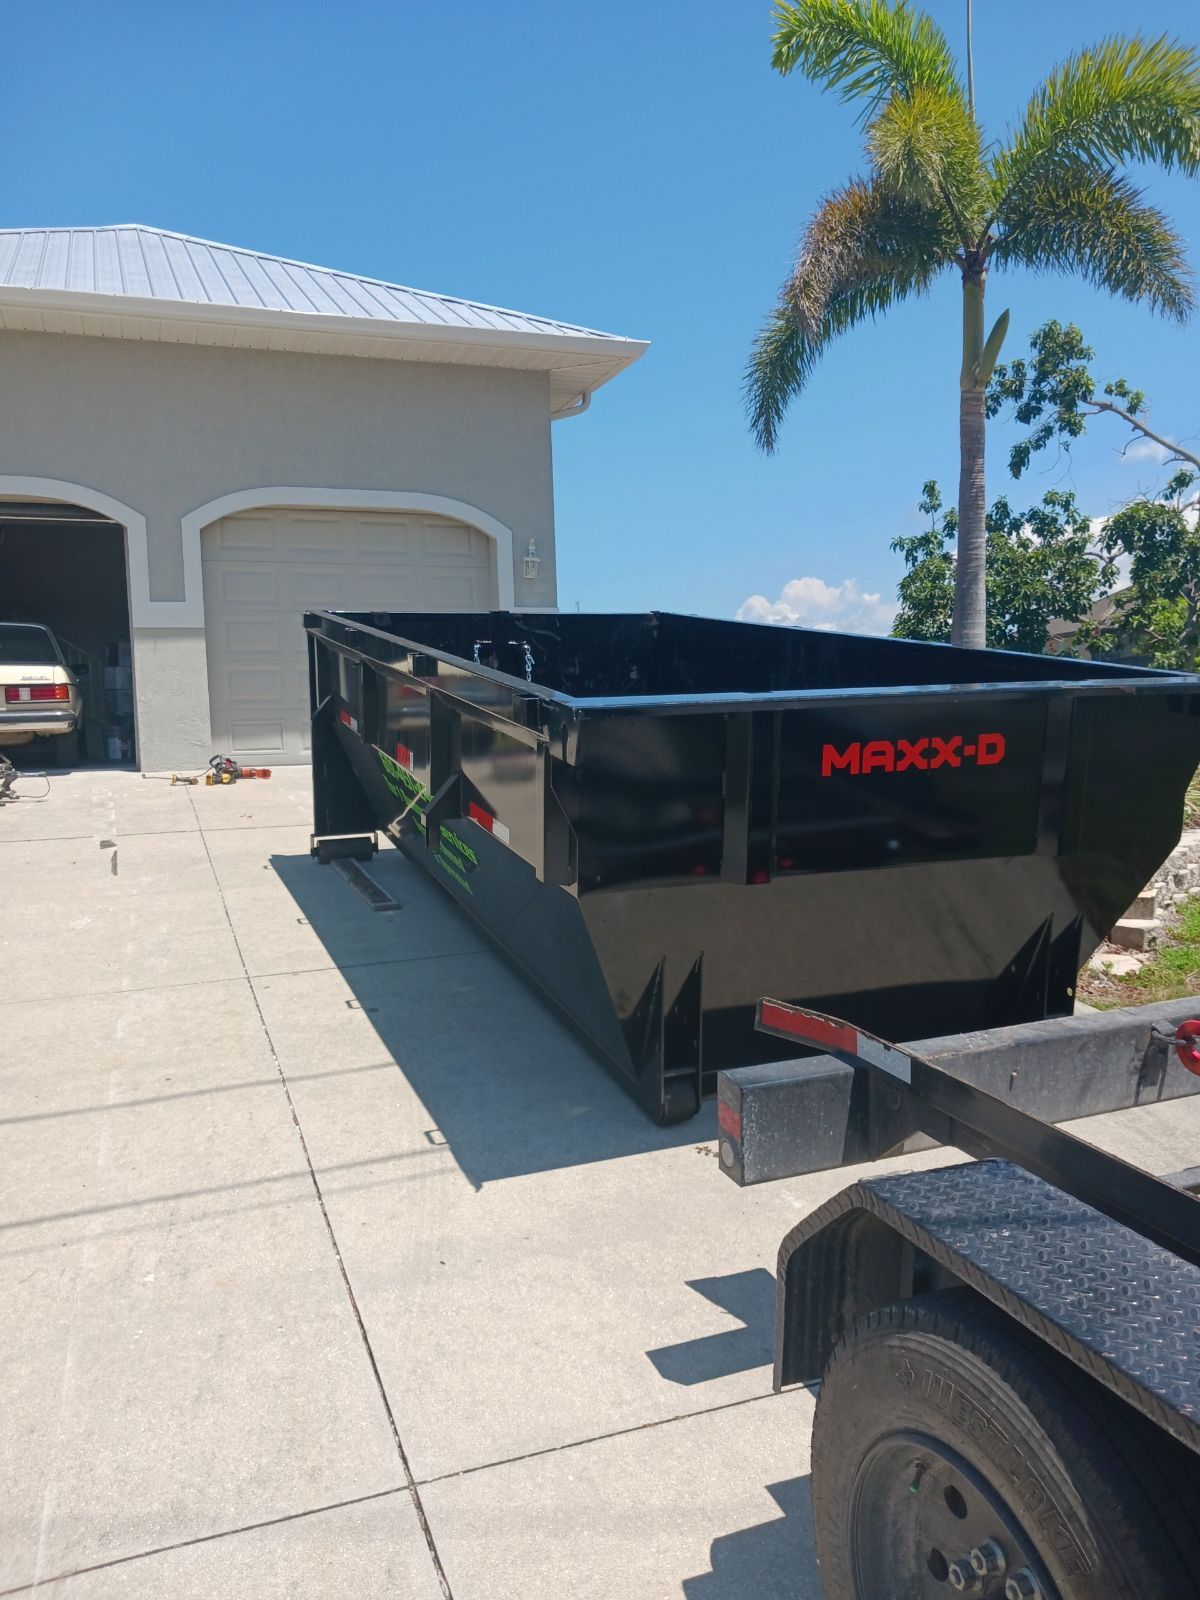 Dumpster Rental being dropped off in a driveway located in Naples FL